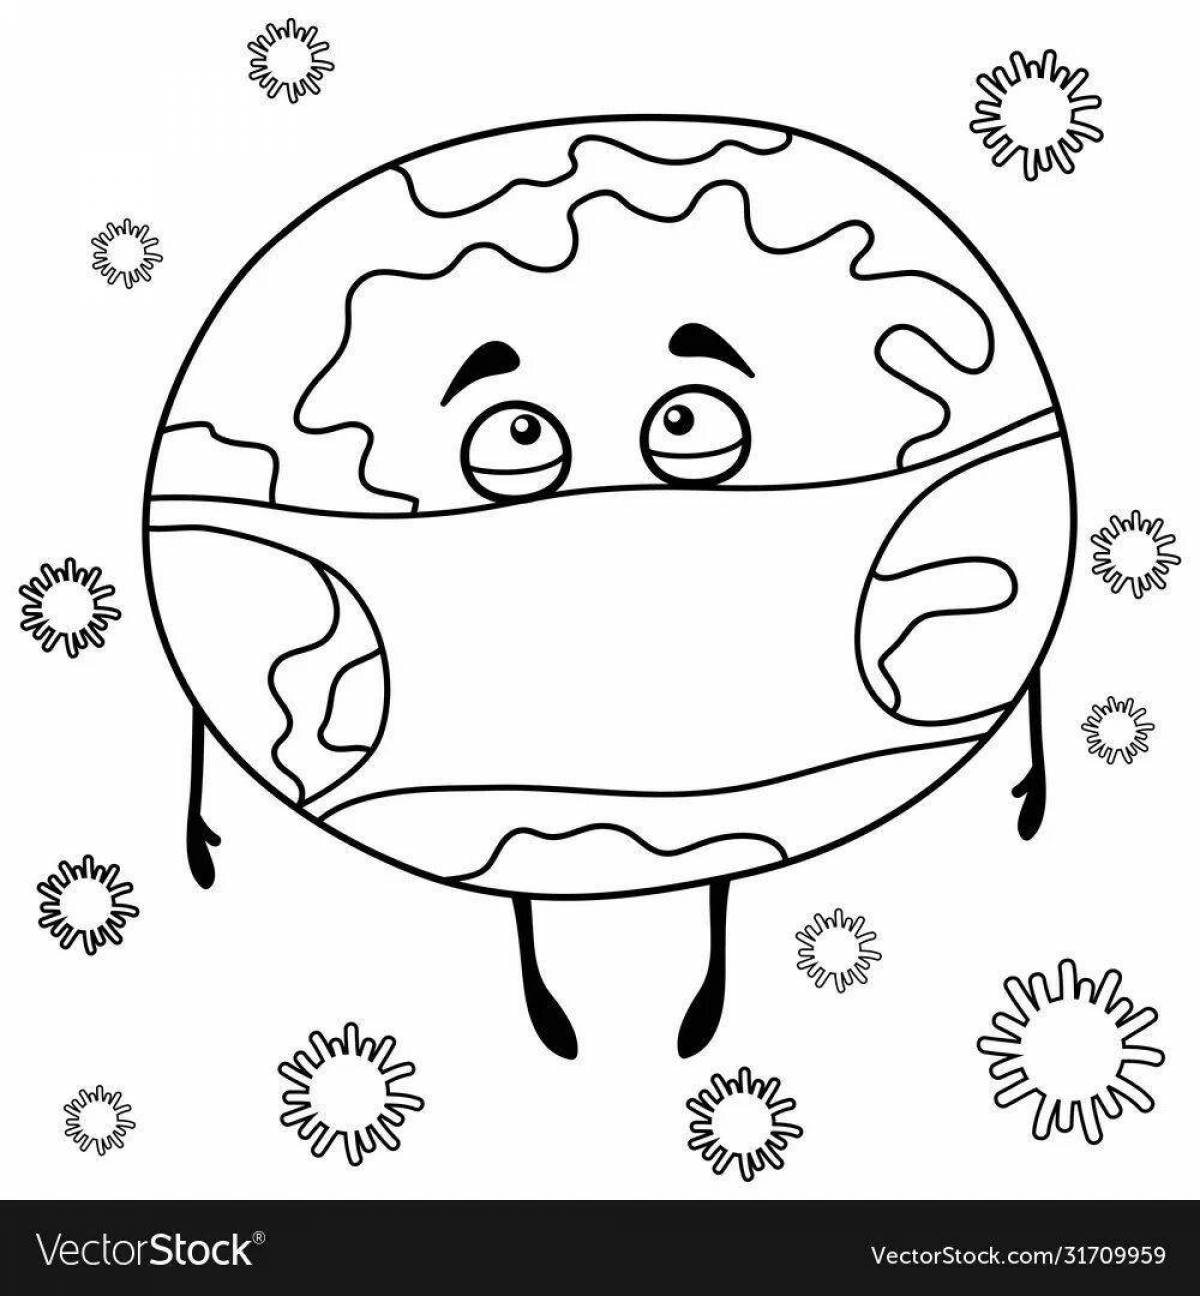 Inspirational moon and earth coloring book